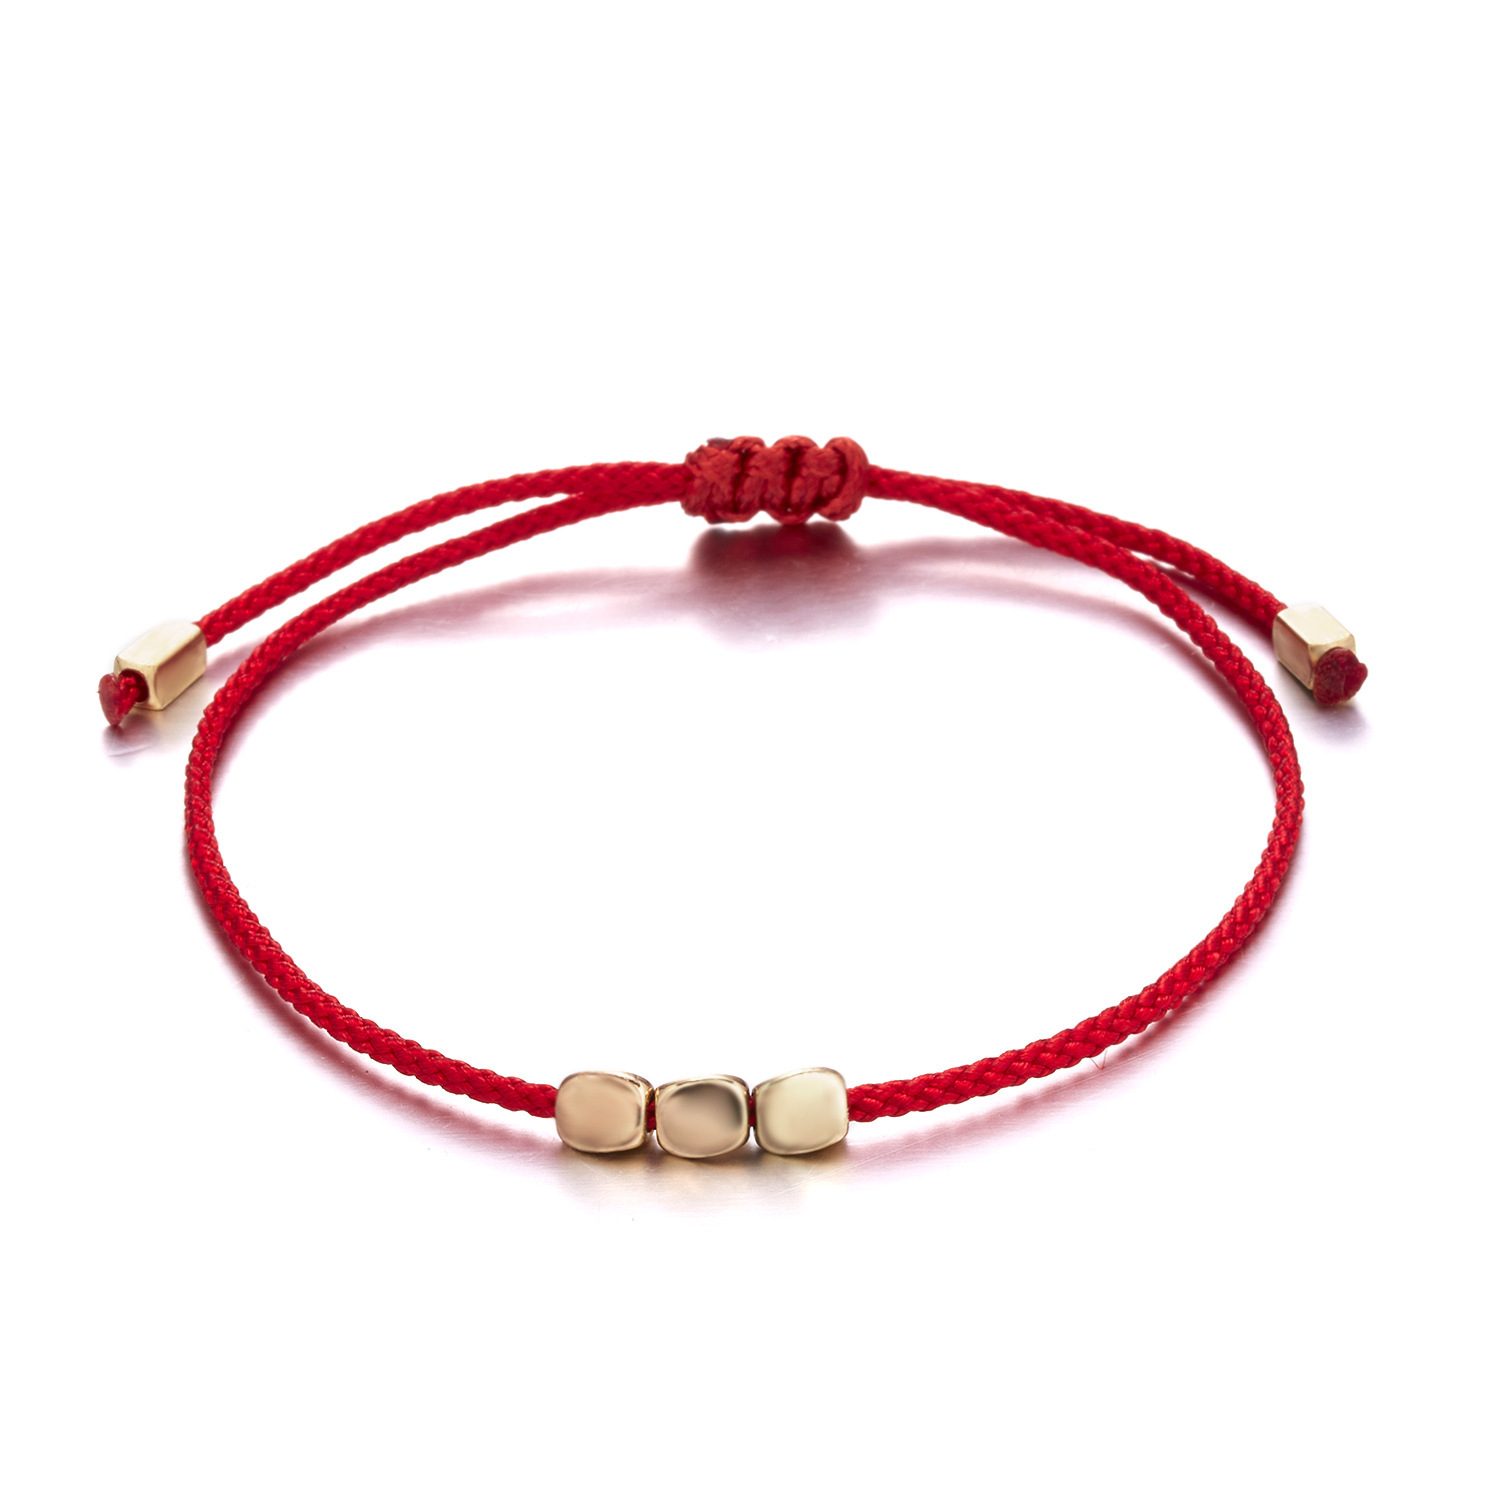 3 red strings with copper beads